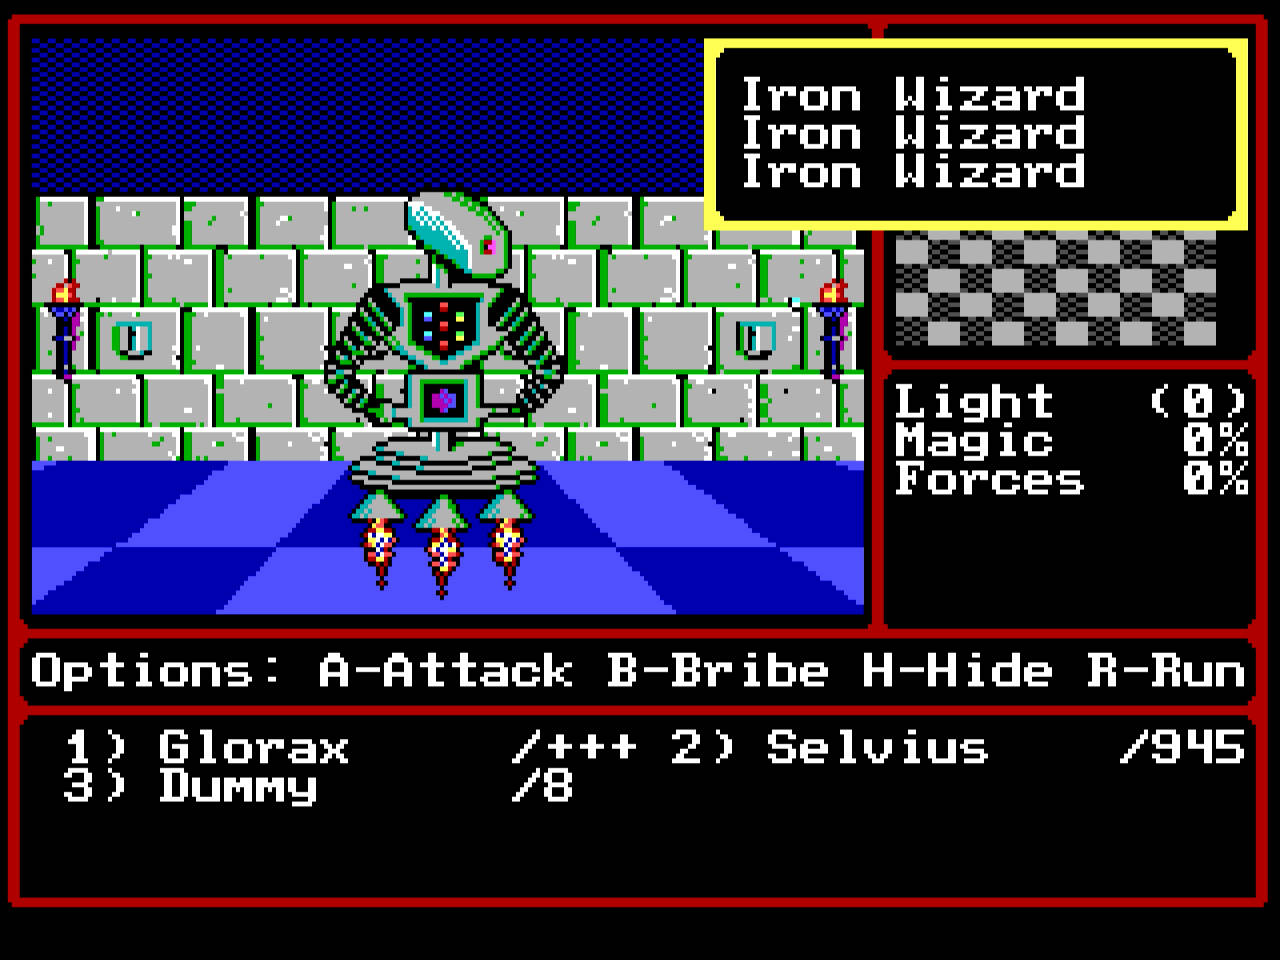 Fighting a robotic enemy called Iron Wizard